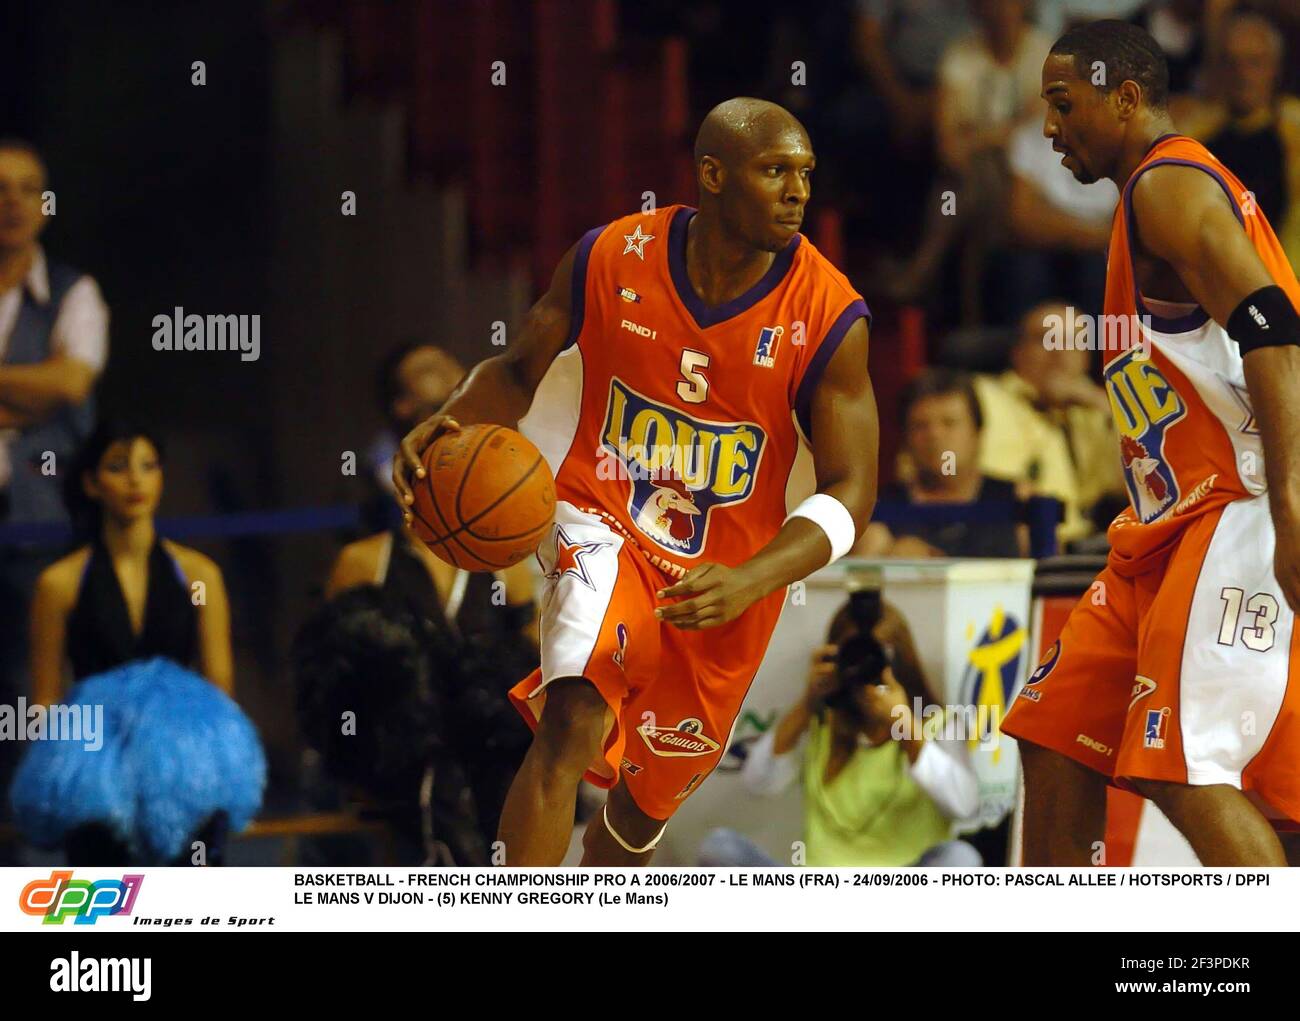 BASKETBALL - FRENCH CHAMPIONSHIP PRO A 2006/2007 - LE MANS (FRA) -  24/09/2006 - PHOTO: PASCAL ALLEE / HOTSPORTS / DPPI LE MANS V DIJON - (5)  KENNY GREGORY (Le Mans Stock Photo - Alamy